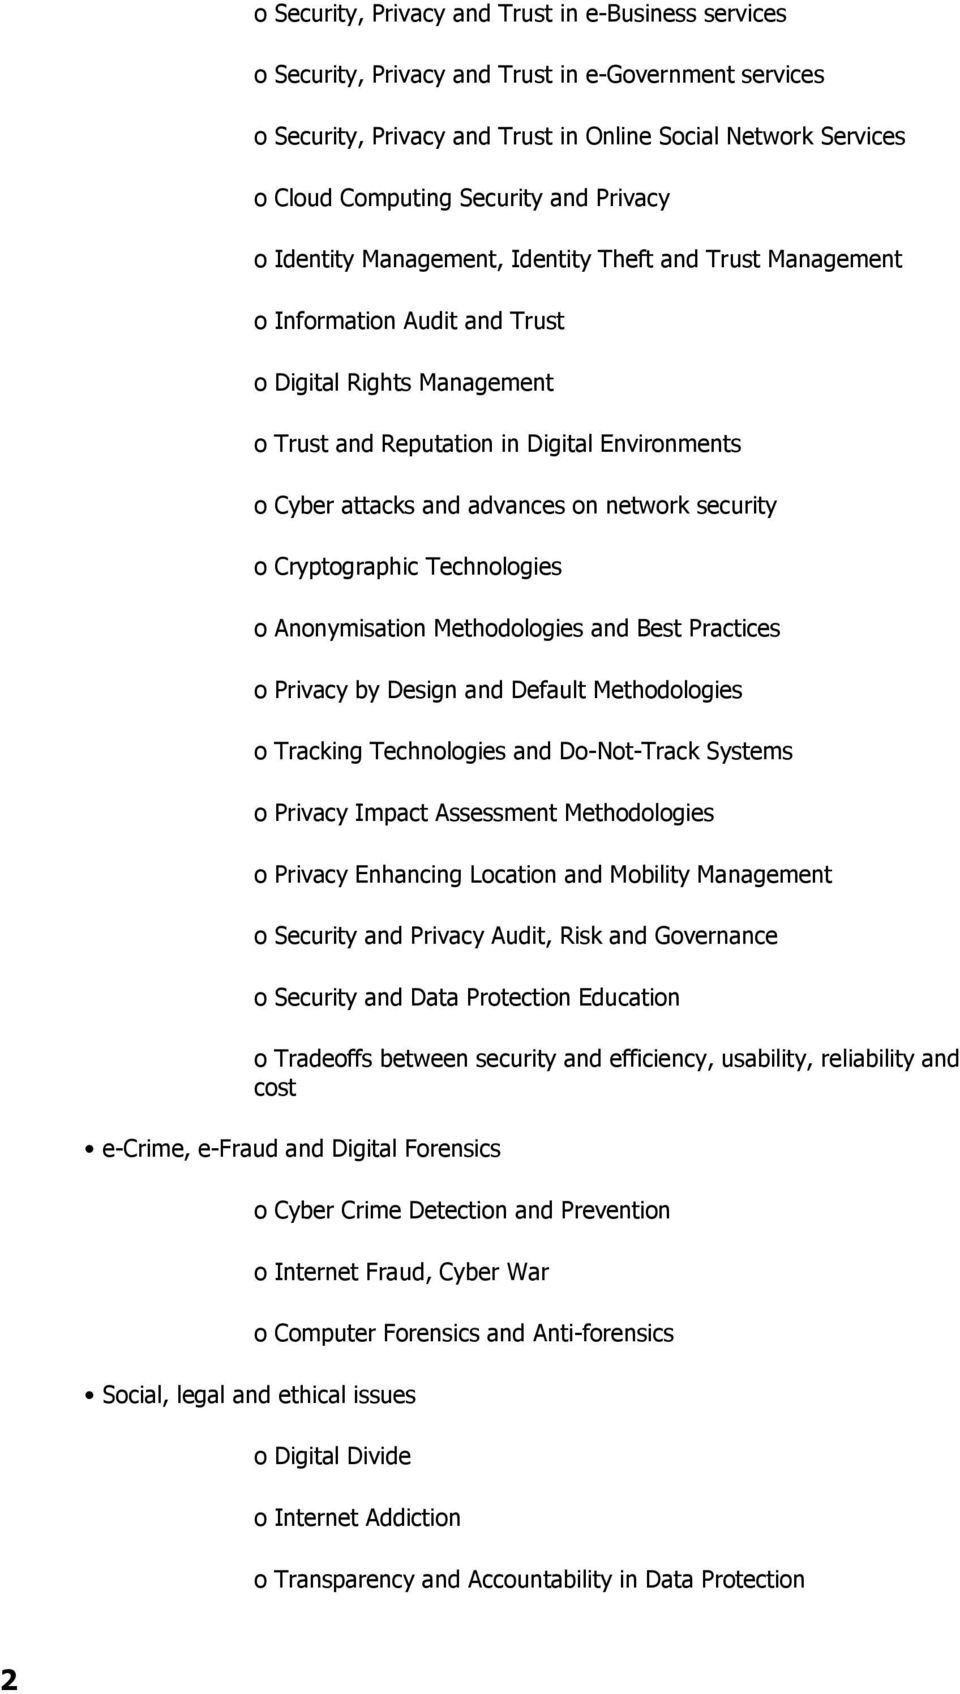 advances on network security o Cryptographic Technologies o Anonymisation Methodologies and Best Practices o Privacy by Design and Default Methodologies o Tracking Technologies and Do-Not-Track